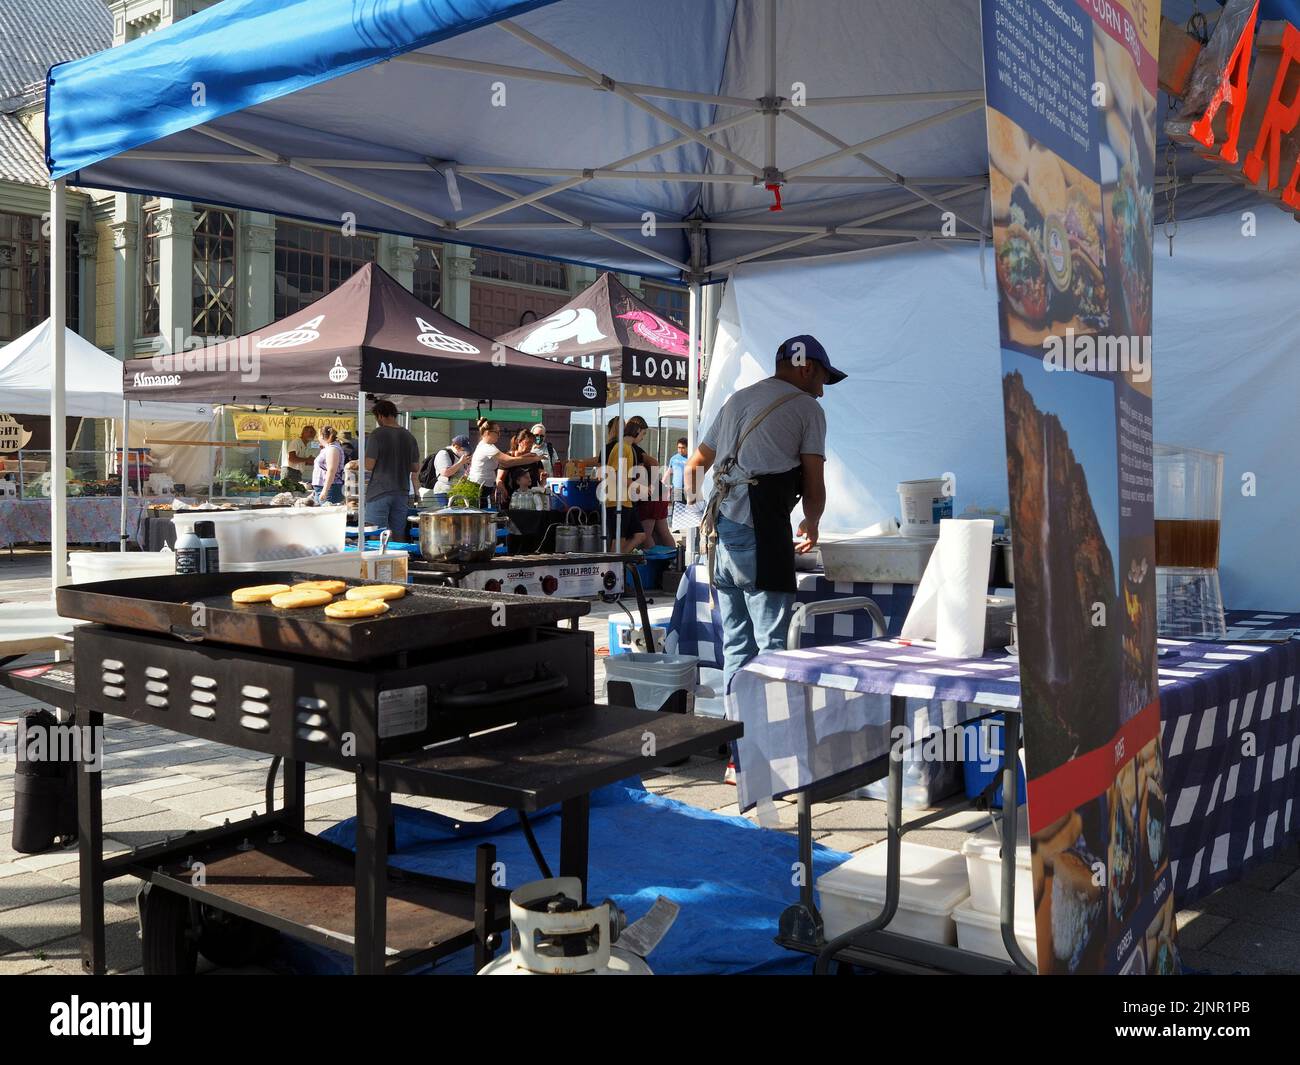 Scenes from the Farmer's Market at Lansdowne Place. Arepas fast food stall with a blue theme. Ottawa, ON, Canada. Stock Photo